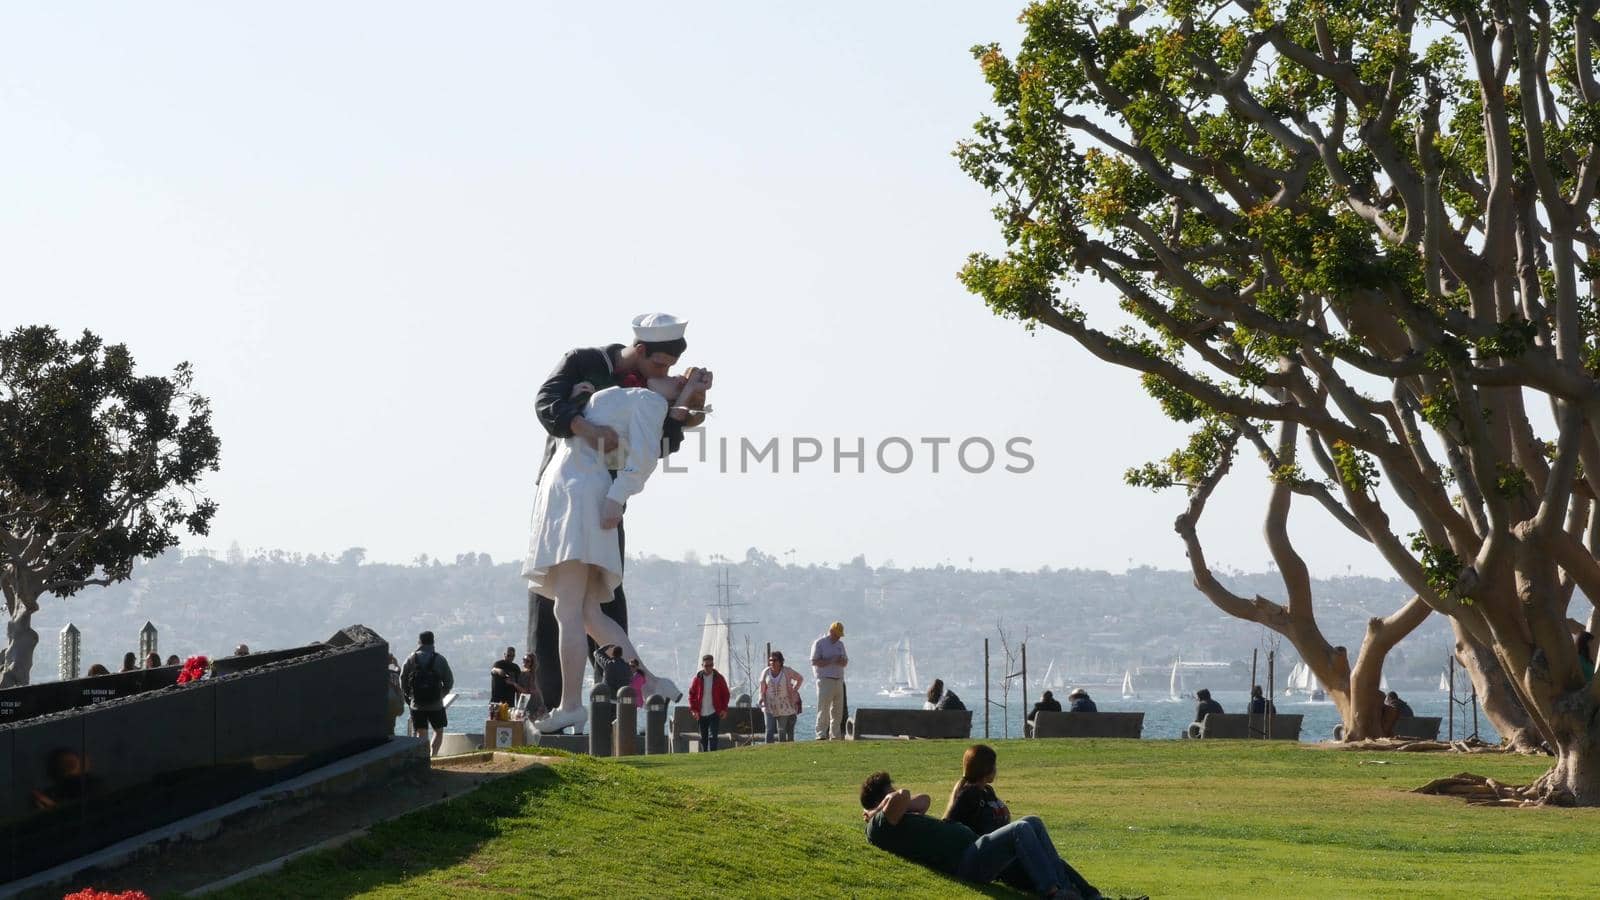 SAN DIEGO, CALIFORNIA USA - 23 FEB 2020: Unconditional Surrender Statue, USS Midway Museum. Symbol of navy fleet and Victory over Japan Day. Sailor kissing a woman, World War II memorial sculpture by DogoraSun